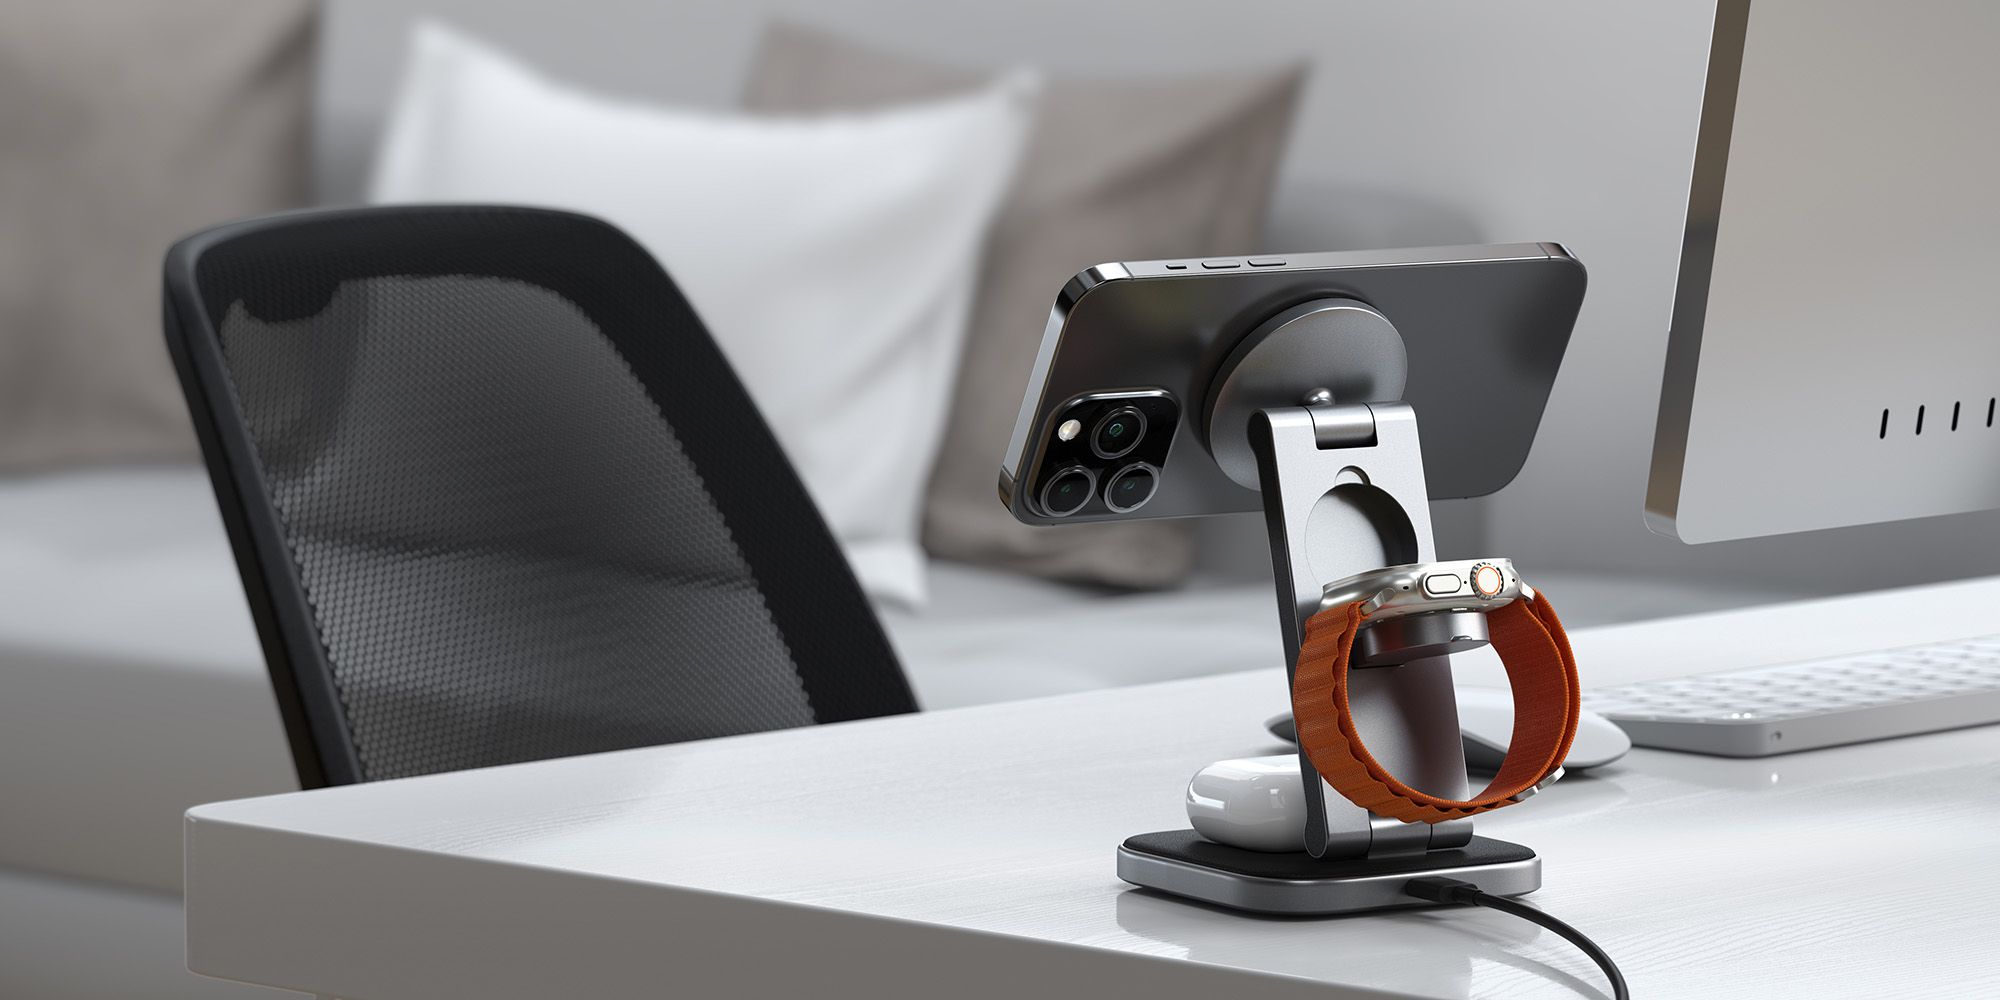 Photo of a charging stand on a desk, holding an iPhone and Apple Watch with an AirPods case on the bottom